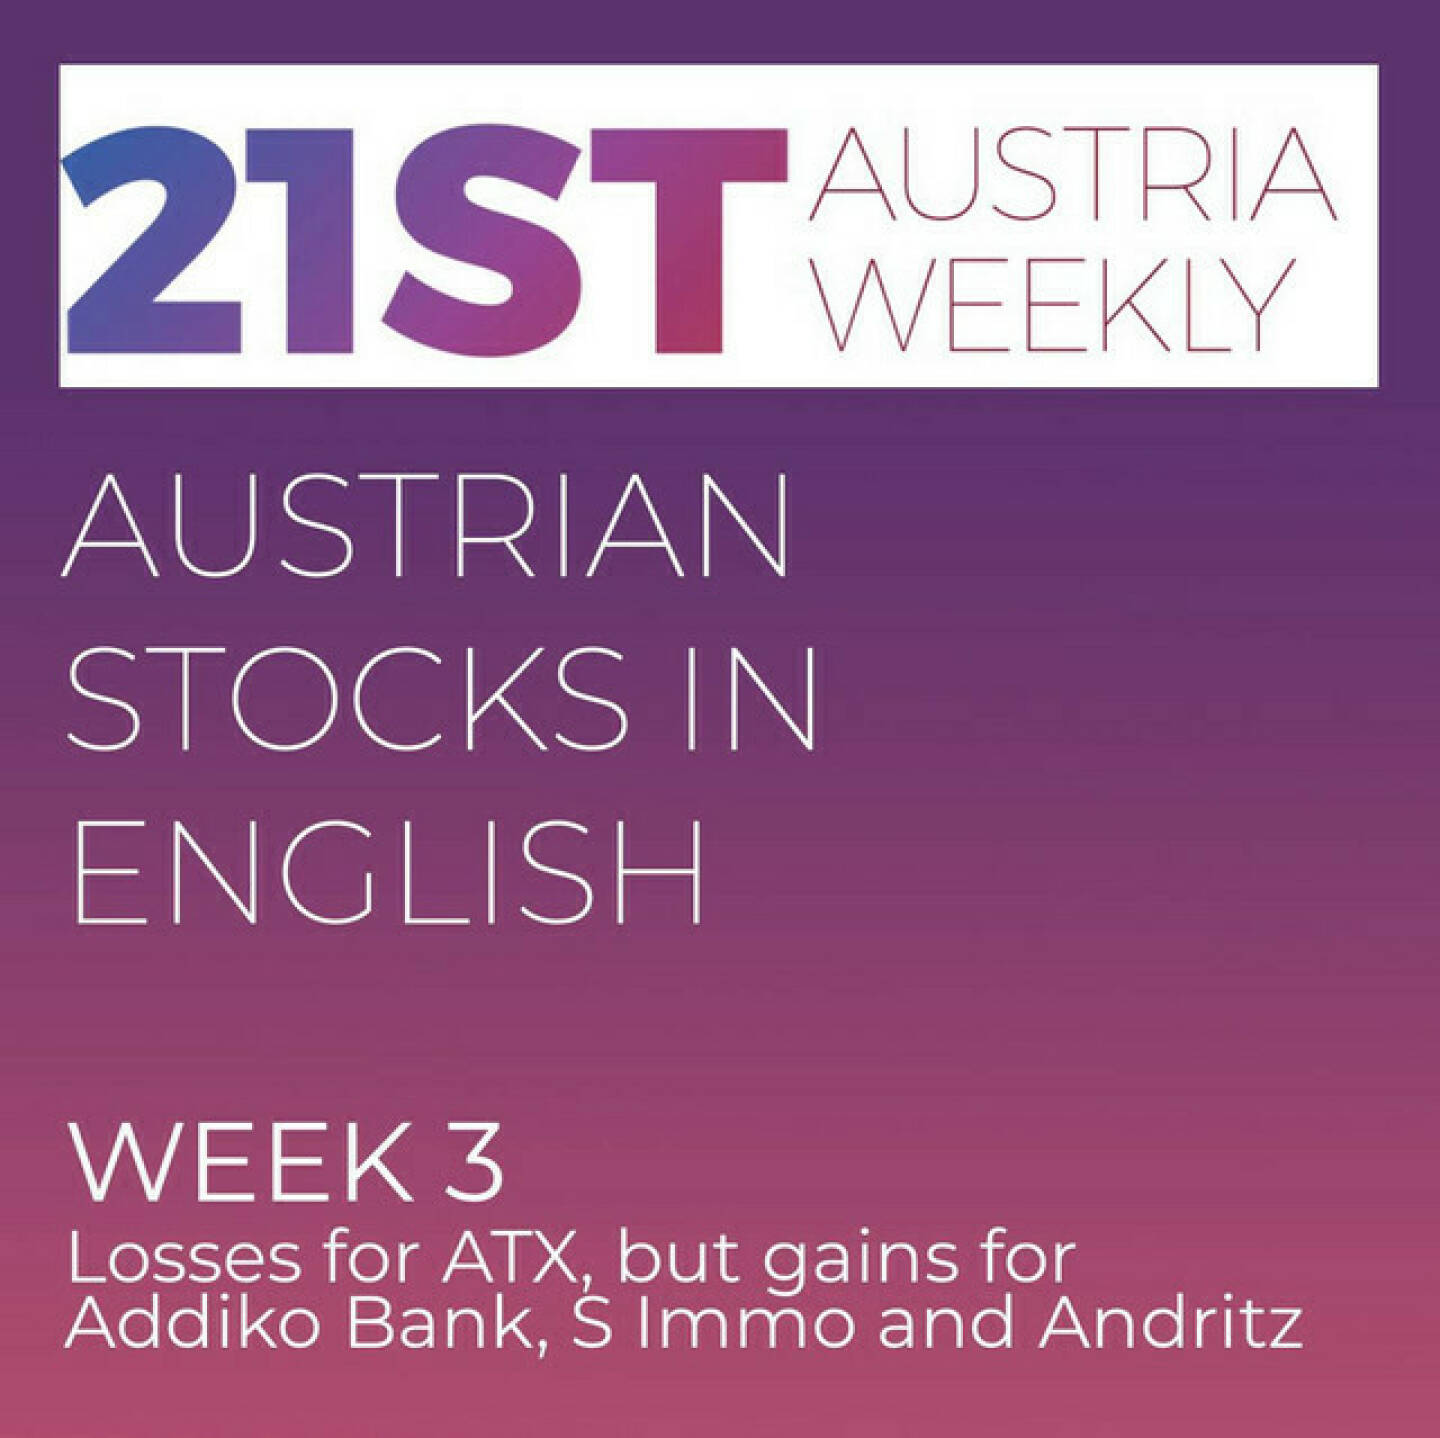 https://open.spotify.com/episode/7cAdWDVxlvsVT8UdvNJnTC
Austrian Stocks in English: Week 3 with losses for ATX, but gains for Addiko Bank, S Immo and Andritz - <p>Welcome to &#34;Austrian Stocks in English - presented by Palfinger&#34;, the english spoken weekly Summary for the Austrian Stock Market,  positioned every Sunday in the mostly german languaged Podcast &#34;Audio-CD.at Indie Podcasts&#34;- Wiener Börse, Sport Musik und Mehr“ . <br/><br/>The following script is based on our 21st Austria weekly. Week 3 brought losses for the ATX, but Addiko Bank, S Immo and Andritz performed well. News came from Kontron, OMV, Kapsch TrafficCom, Austrian Post, SBO, Vienna Airport, Kontron, Andritz and AT&amp;S., spoken by Alison.<br/><br/><a href=https://boerse-social.com/21staustria target=_blank>https://boerse-social.com/21staustria</a><br/><br/><a href=https://www.audio-cd.at/search/austrian%20stocks%20in%20english target=_blank>https://www.audio-cd.at/search/austrian%20stocks%20in%20english</a><br/><br/>30x30 Finanzwissen pur für Österreich auf Spotify spoken by Alison:: <a href=https://open.spotify.com/playlist/3MfSMoCXAJMdQGwjpjgmLm target=_blank>https://open.spotify.com/playlist/3MfSMoCXAJMdQGwjpjgmLm</a><br/><br/>Please rate my Podcast on Apple Podcasts (or Spotify): <a href=https://podcasts.apple.com/at/podcast/audio-cd-at-indie-podcasts-wiener-boerse-sport-musik-und-mehr/id1484919130 target=_blank>https://podcasts.apple.com/at/podcast/audio-cd-at-indie-podcasts-wiener-boerse-sport-musik-und-mehr/id1484919130</a> .And please spread the word : <a href=https://www.boerse-social.com/21staustria target=_blank>https://www.boerse-social.com/21staustria</a> - the address to subscribe to the weekly summary as a PDF.</p>